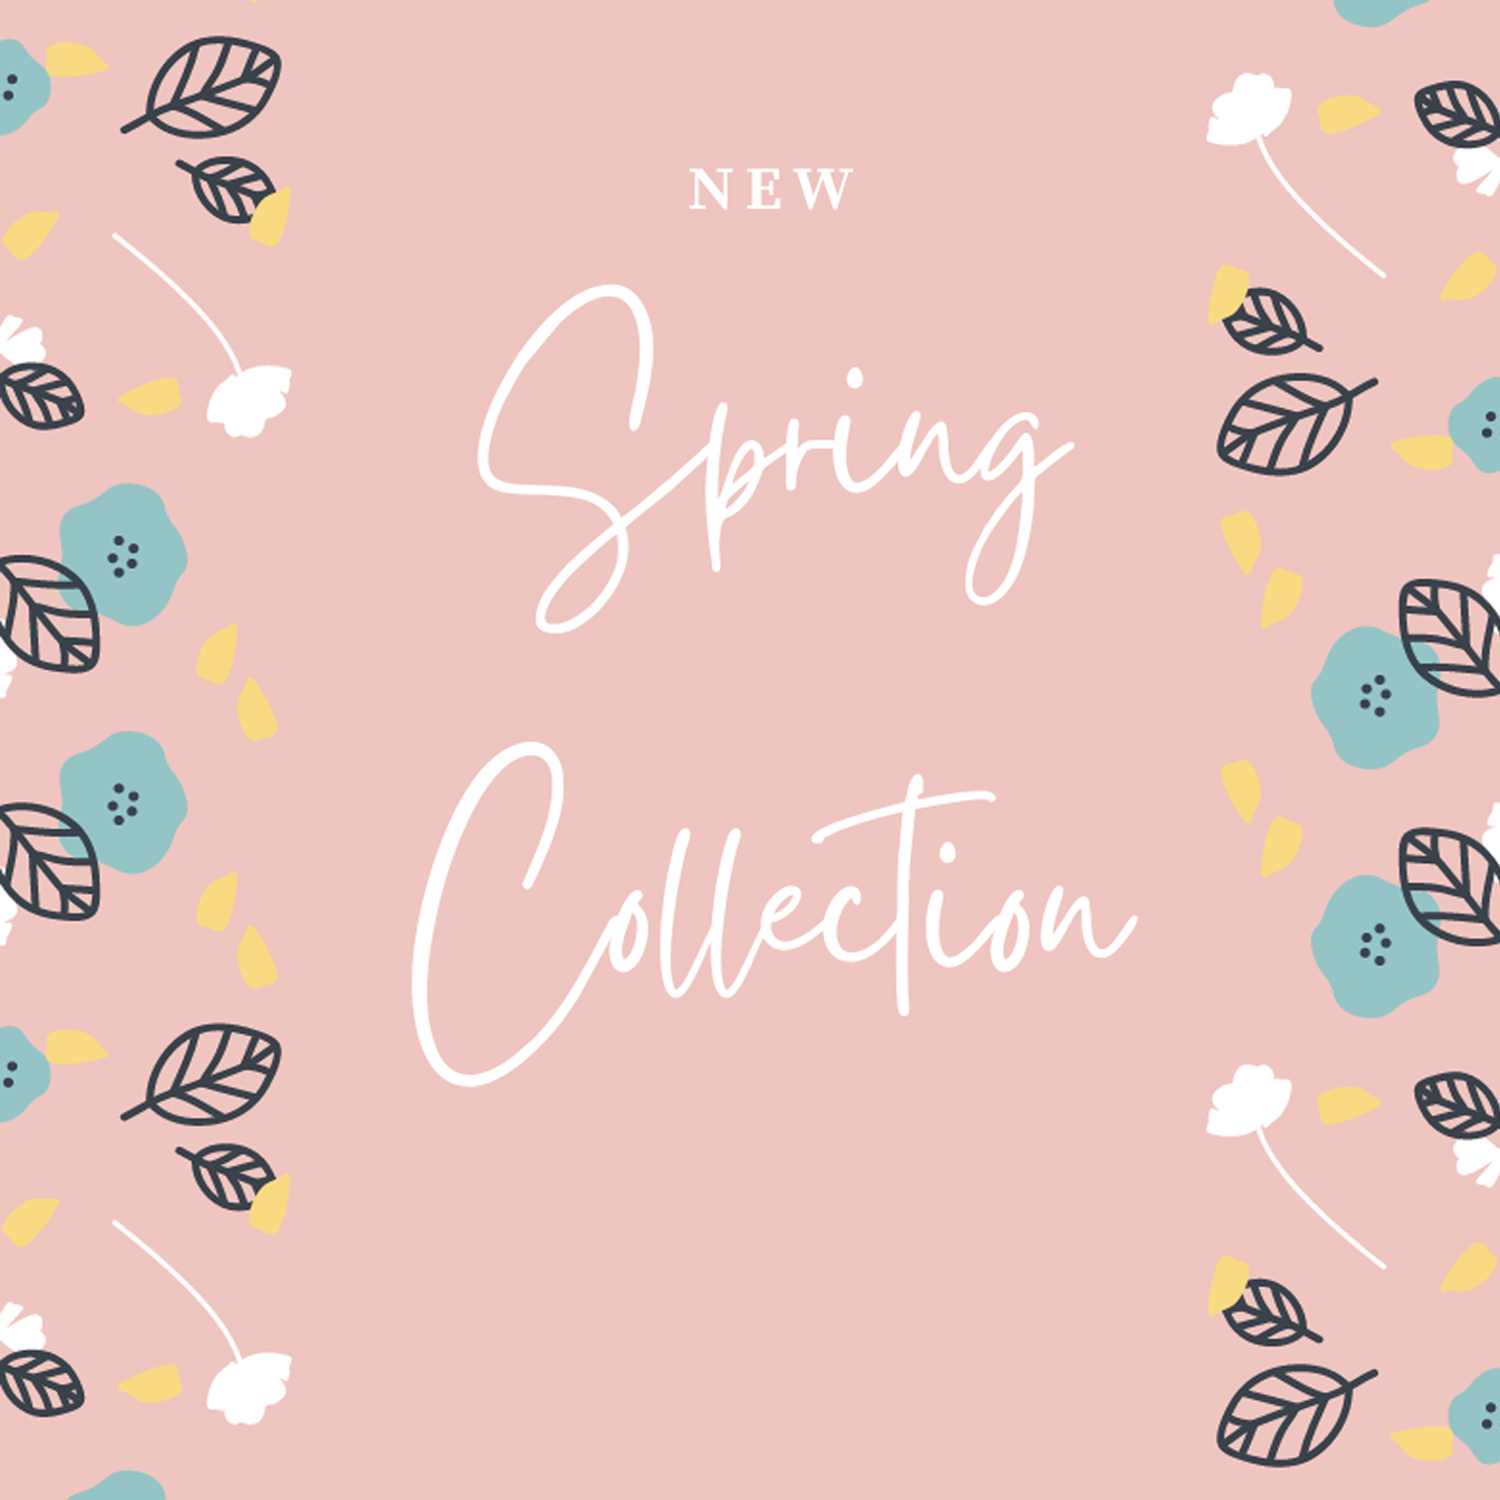 Spring Collection Just Launched!